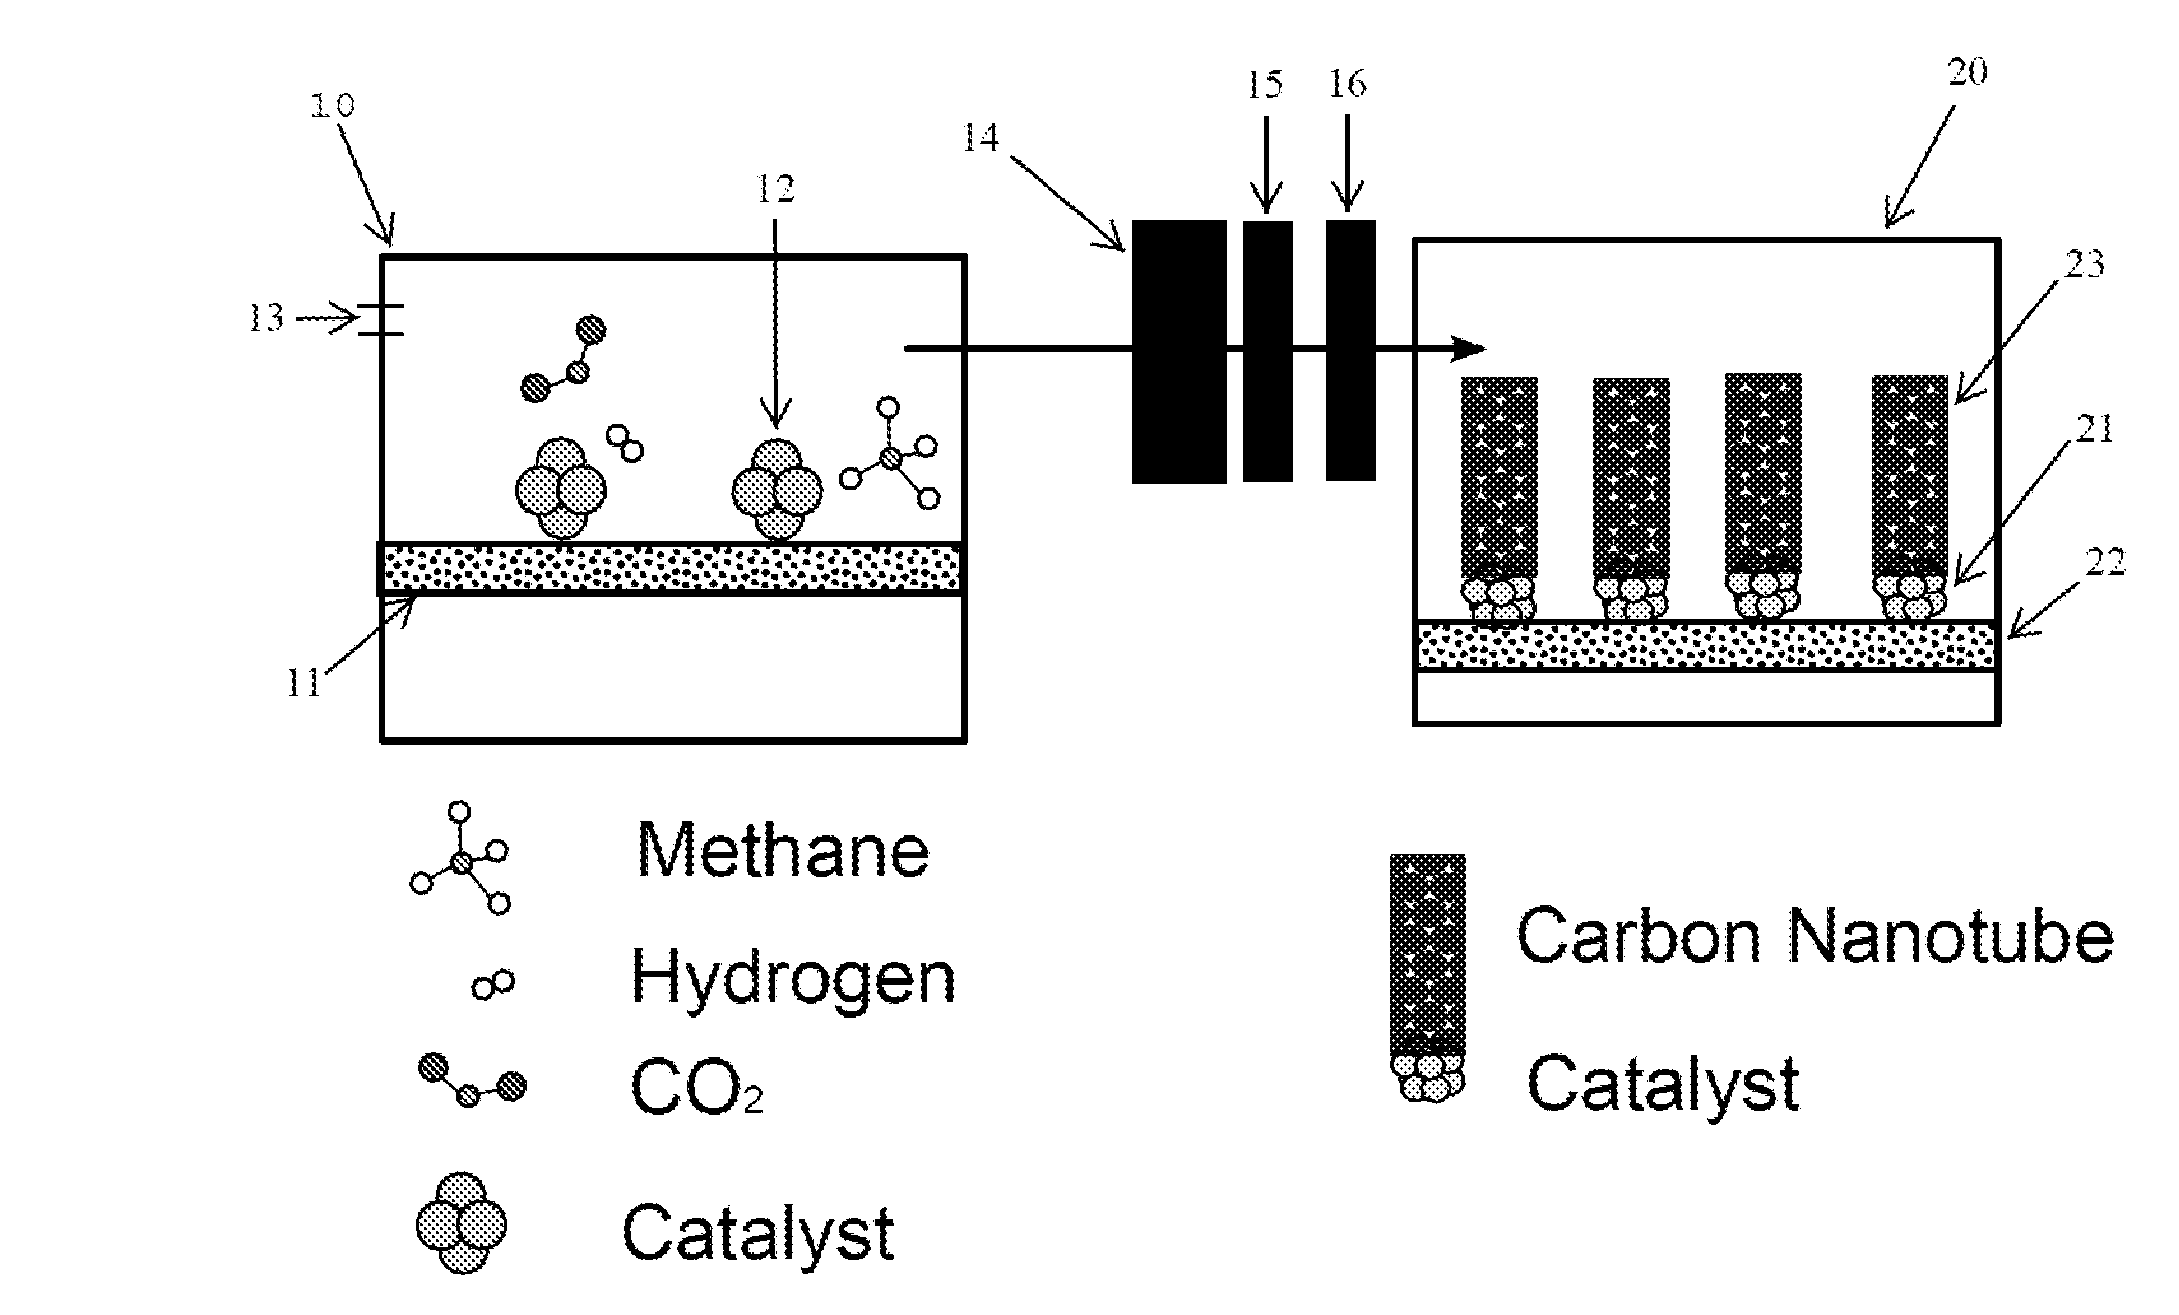 Carbon nano-tube production from carbon dioxide